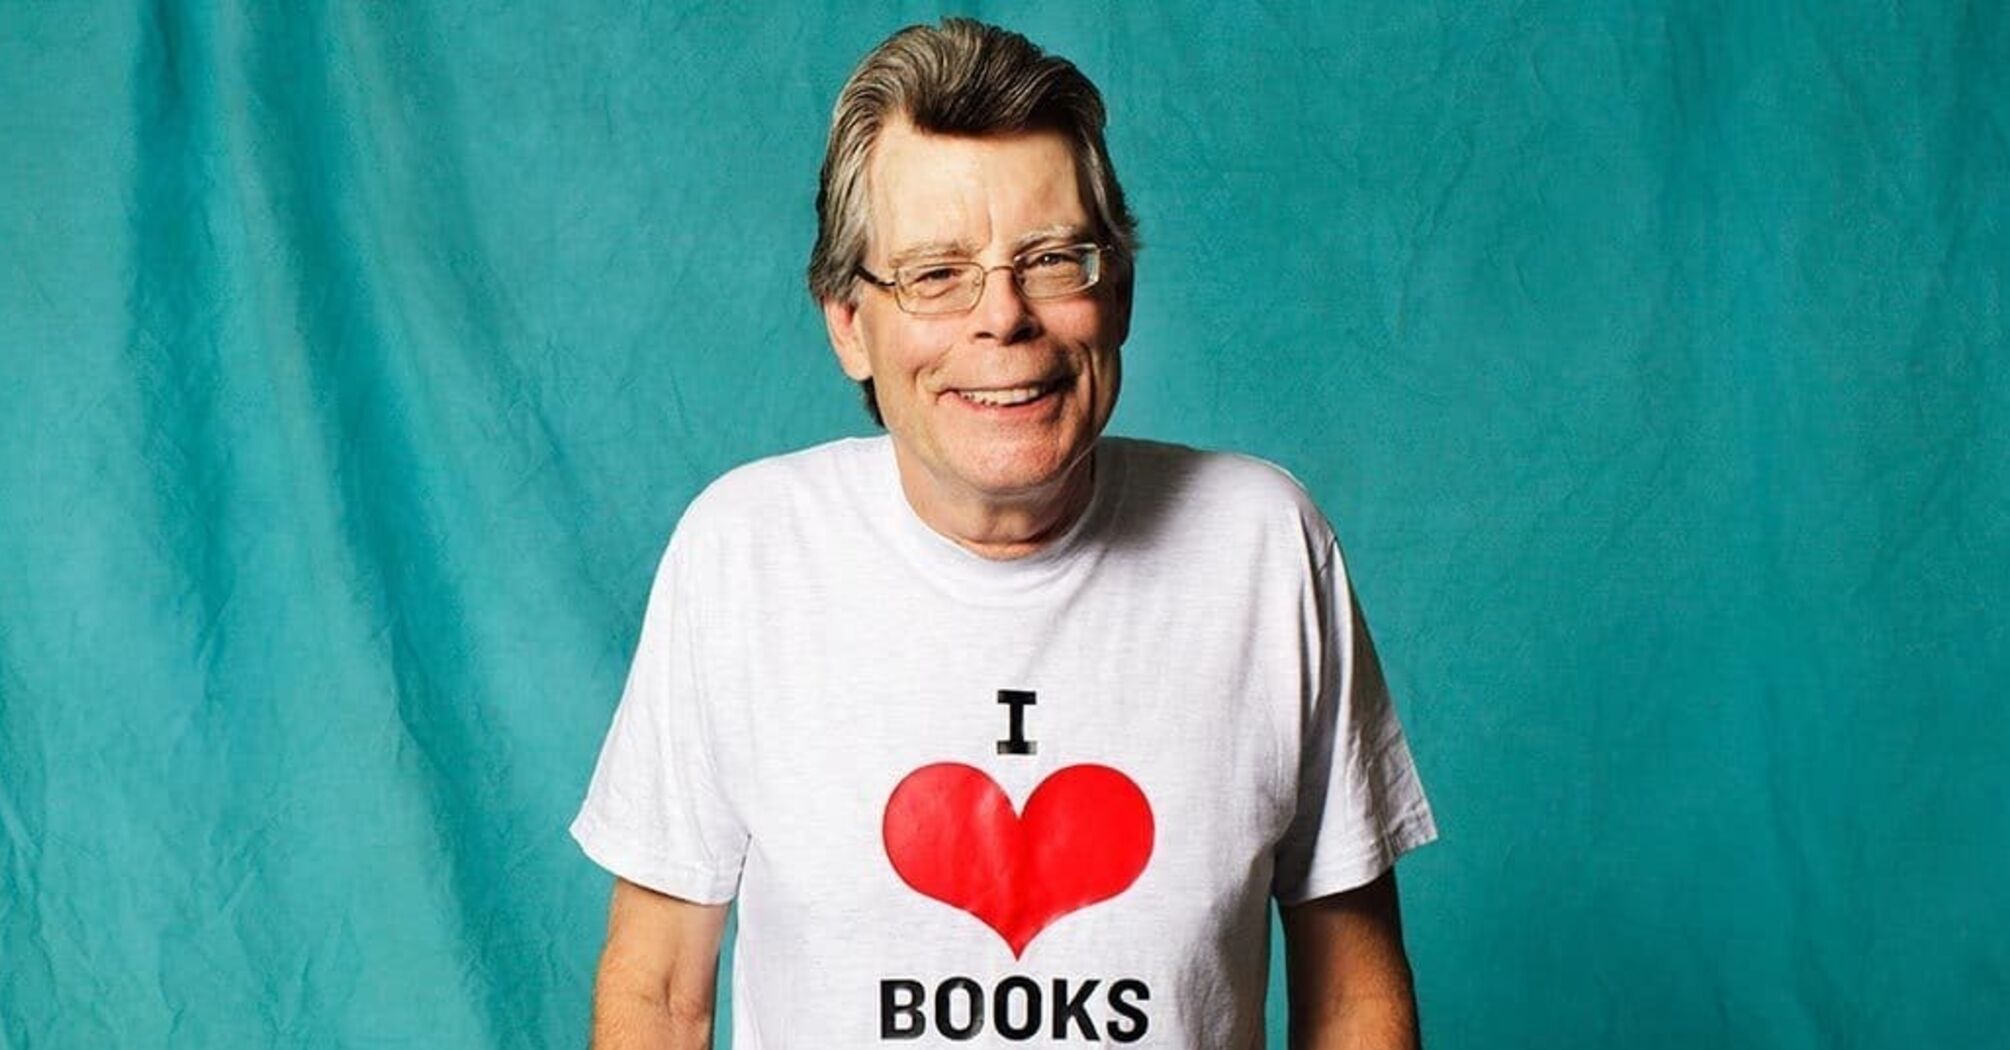 5 interesting facts about Stephen King